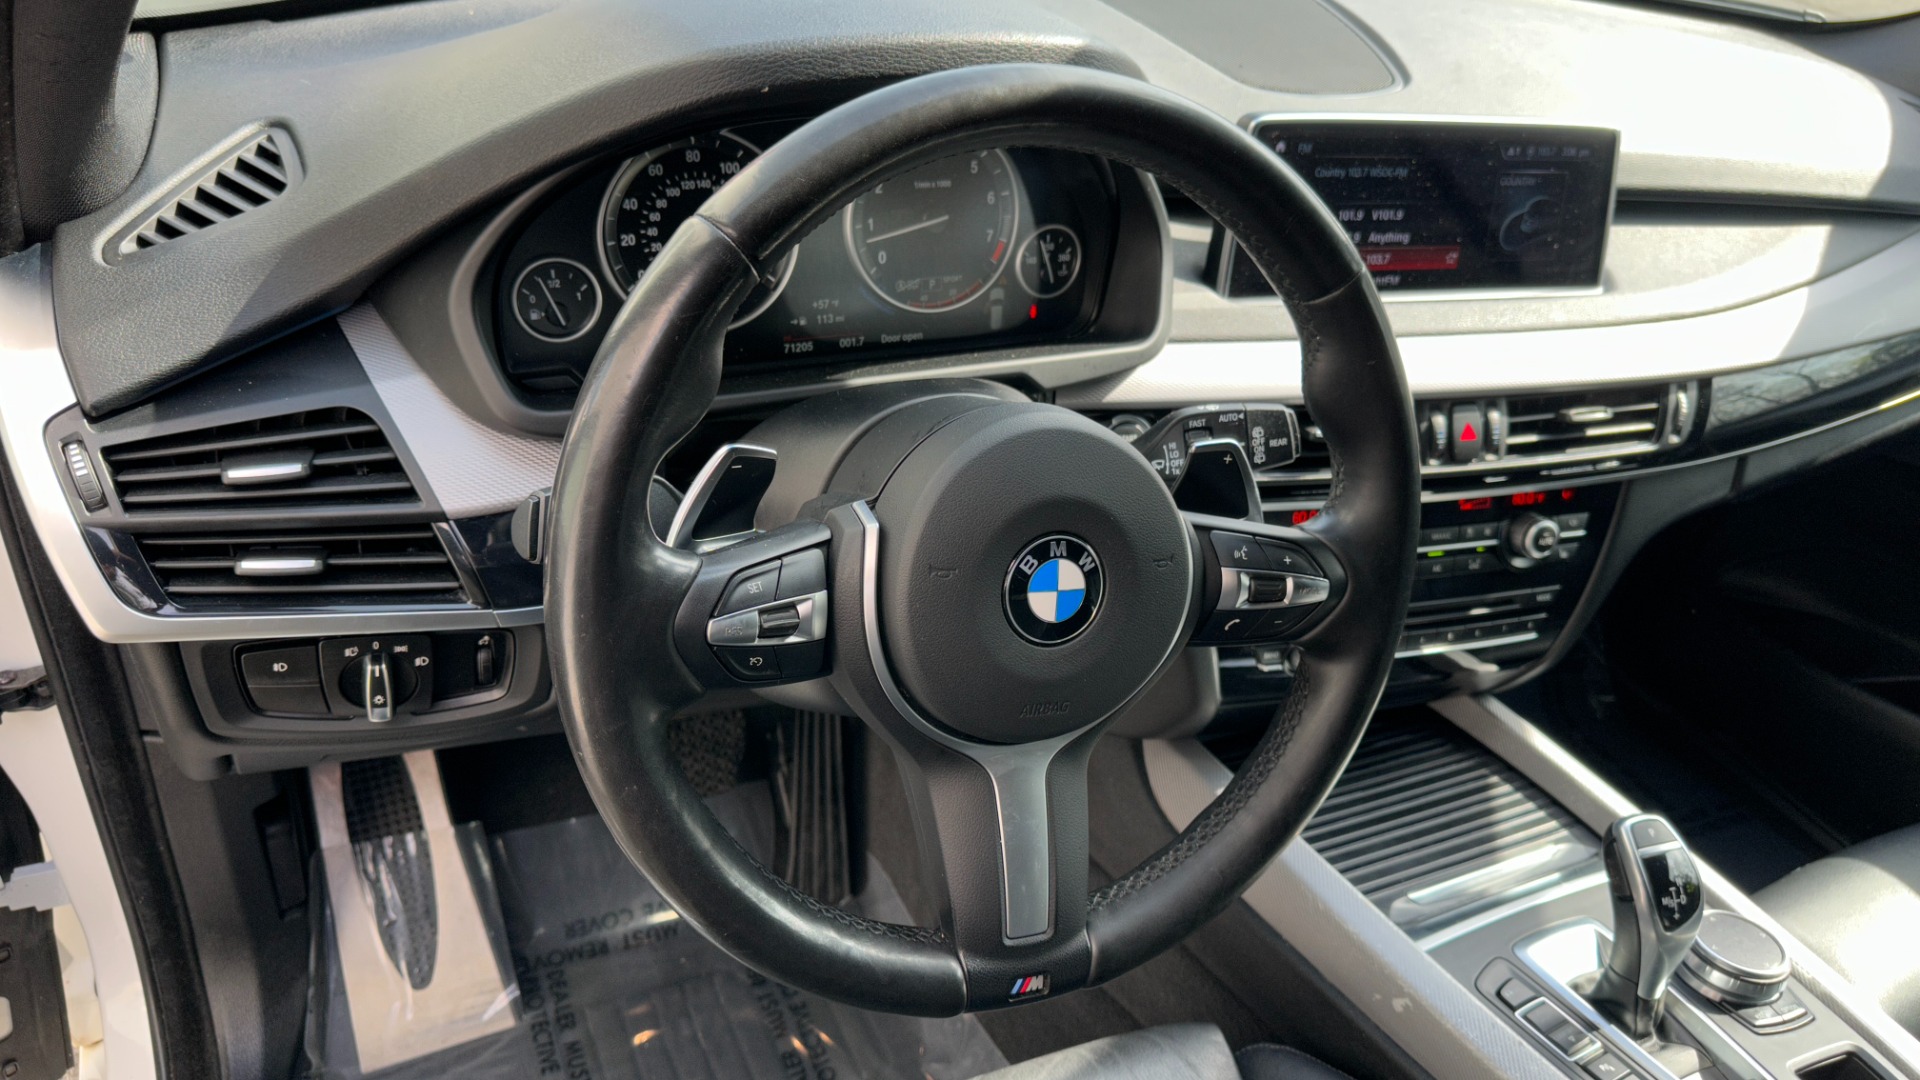 Used 2018 BMW X5 XDRIVE35I / M-SPORT / NAV / SUNROOF / H/K SND / REARVIEW for sale Sold at Formula Imports in Charlotte NC 28227 17